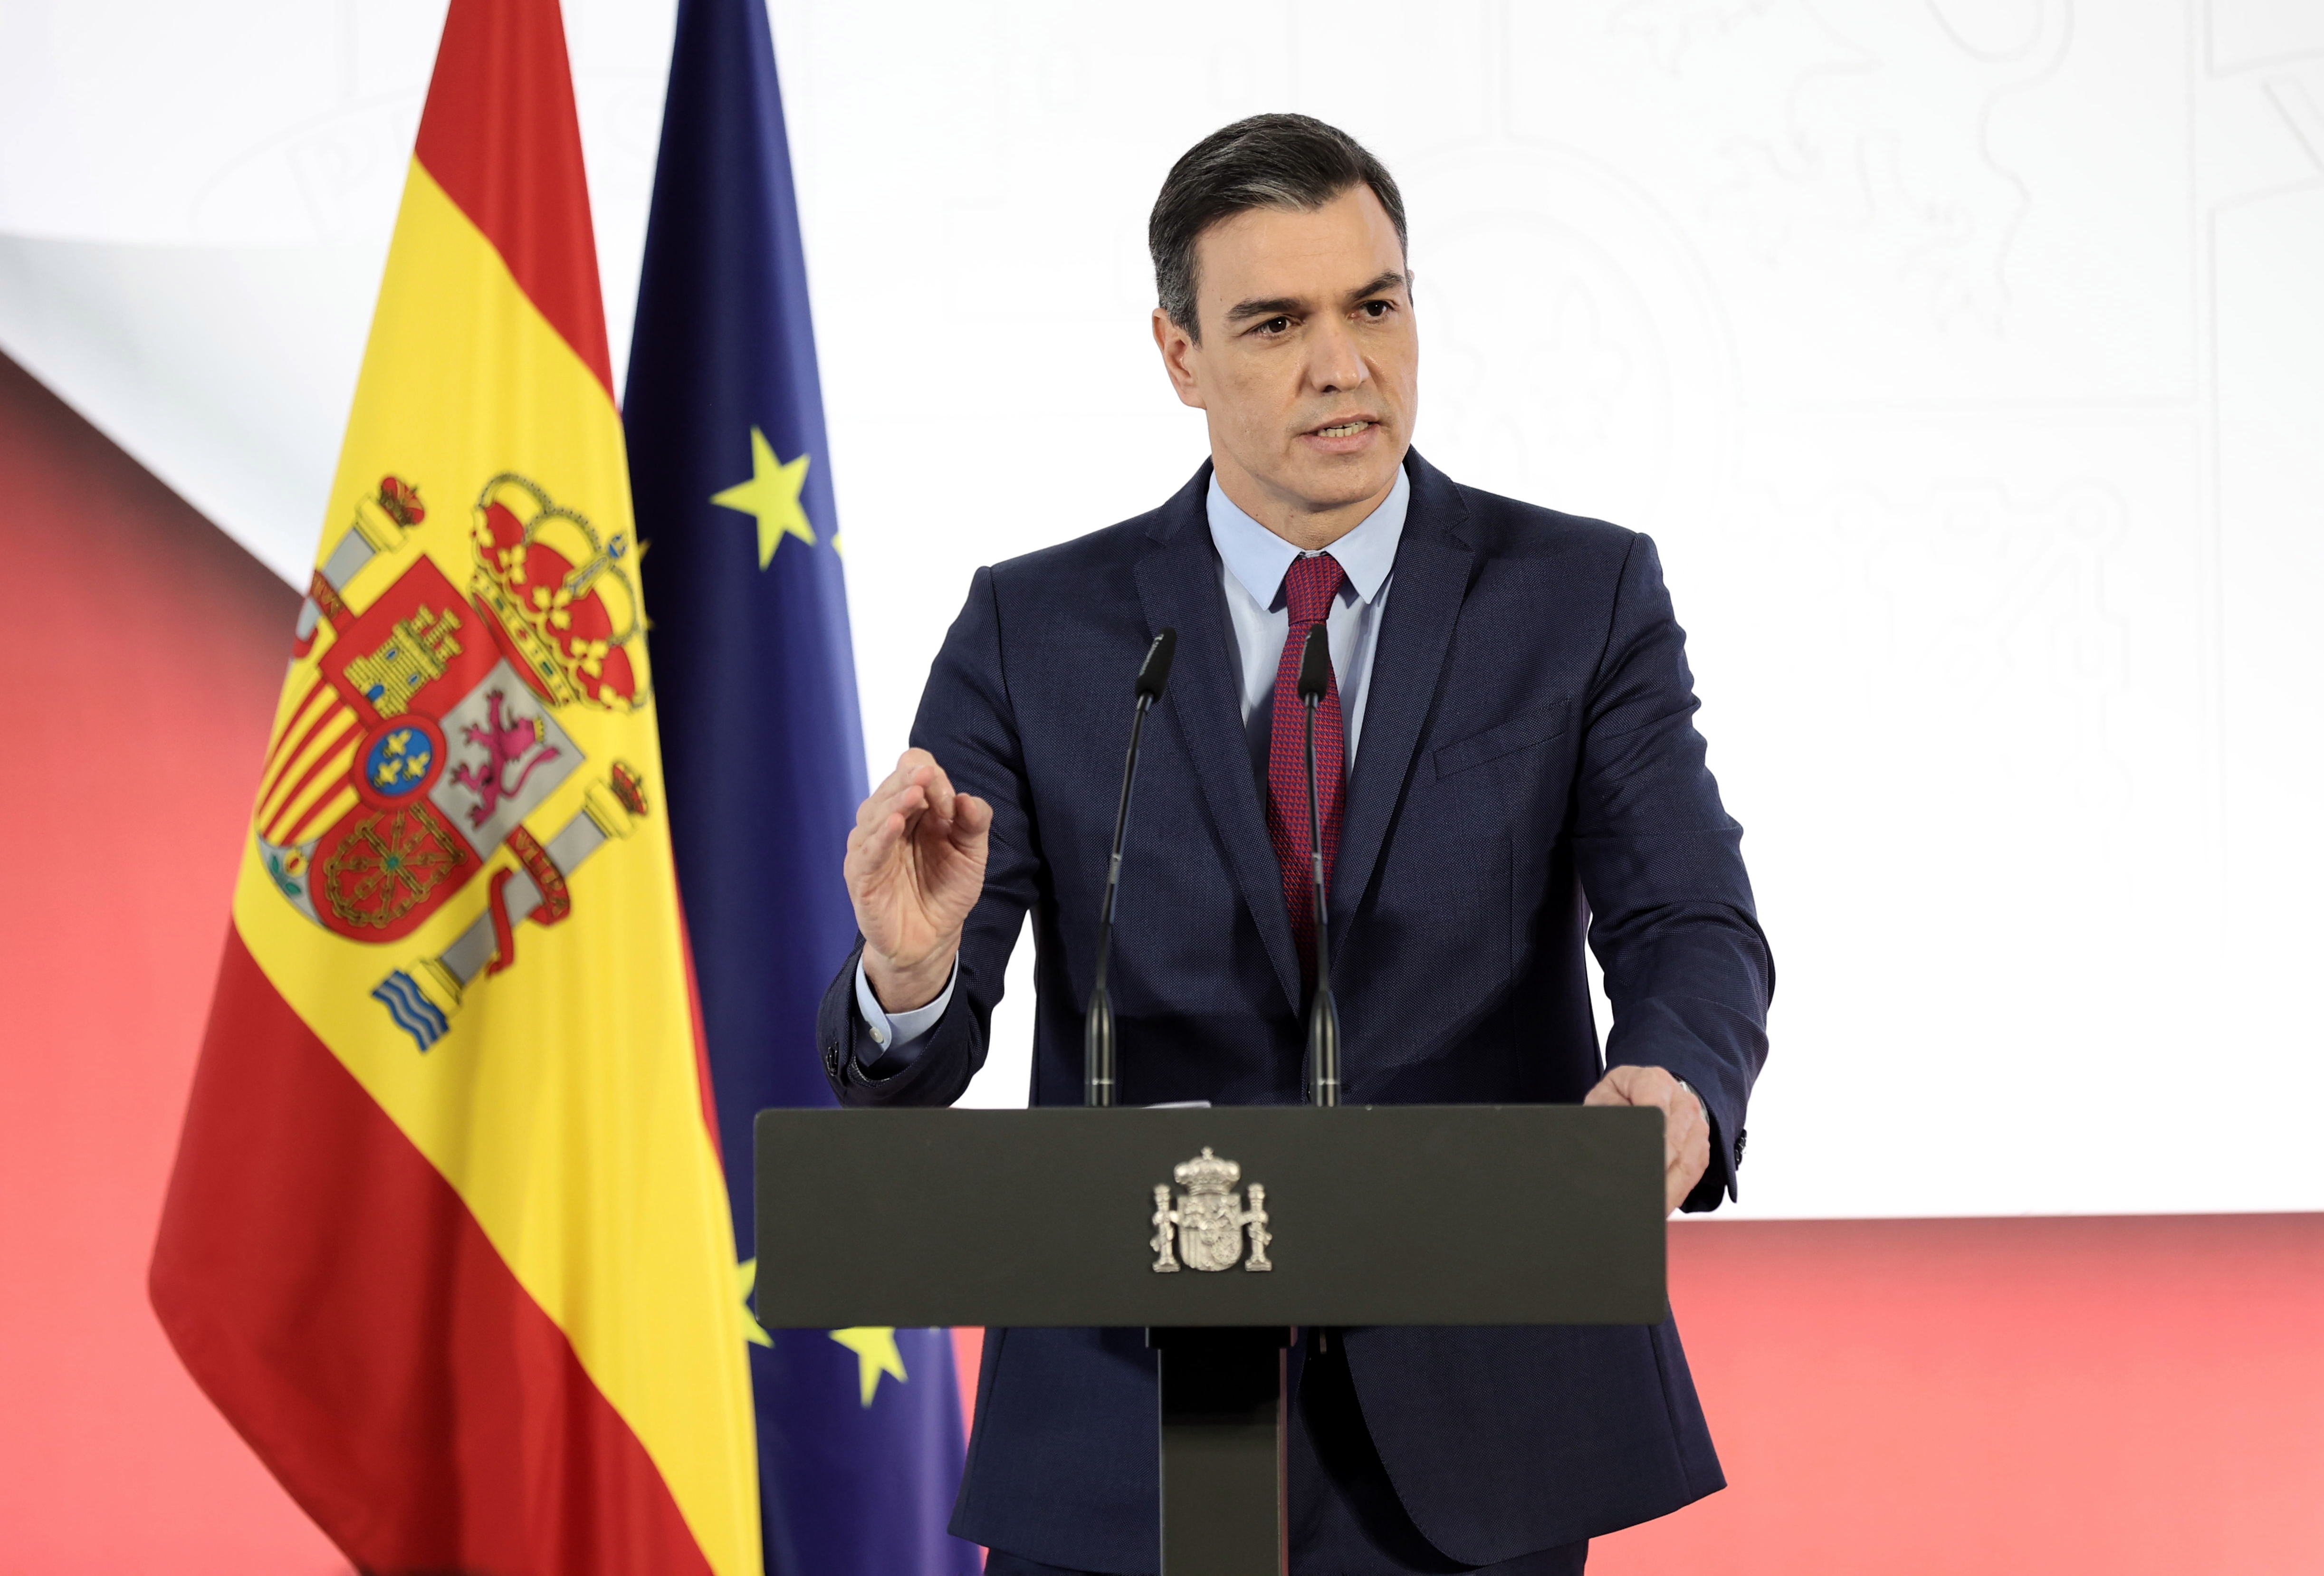 The President of the Government, Pedro Sanchez, presents the accountability report of the Government of Spain for 2021, 'Cumpliendo', at La Moncloa, on 29 December, 2021 Madrid, Spain. 